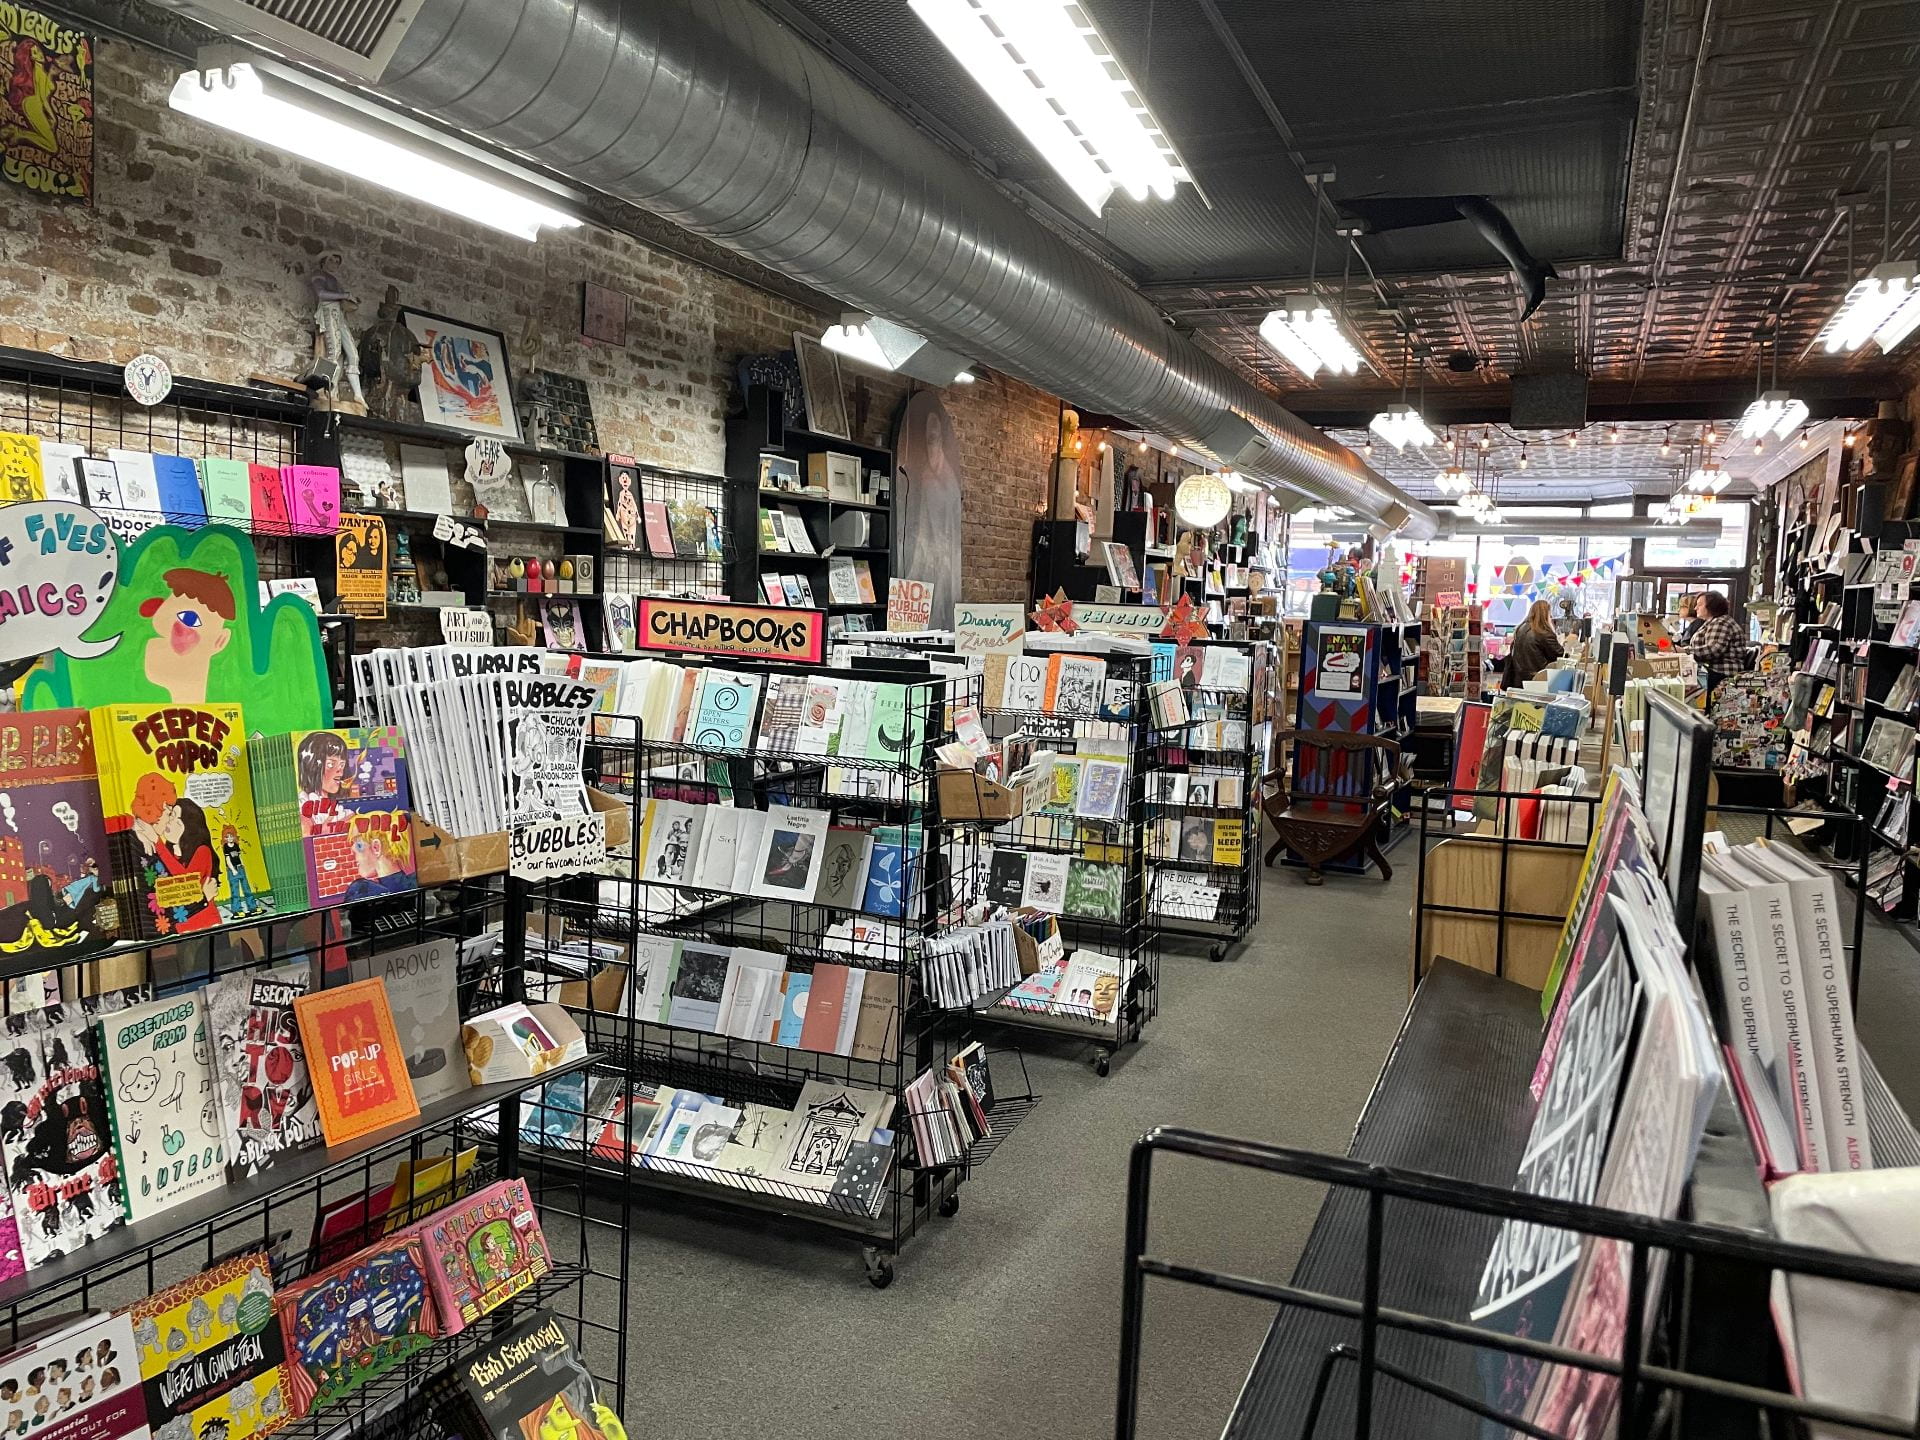 A photo of the inside of Quimby’s Bookstore in Wicker Park, Chicago.